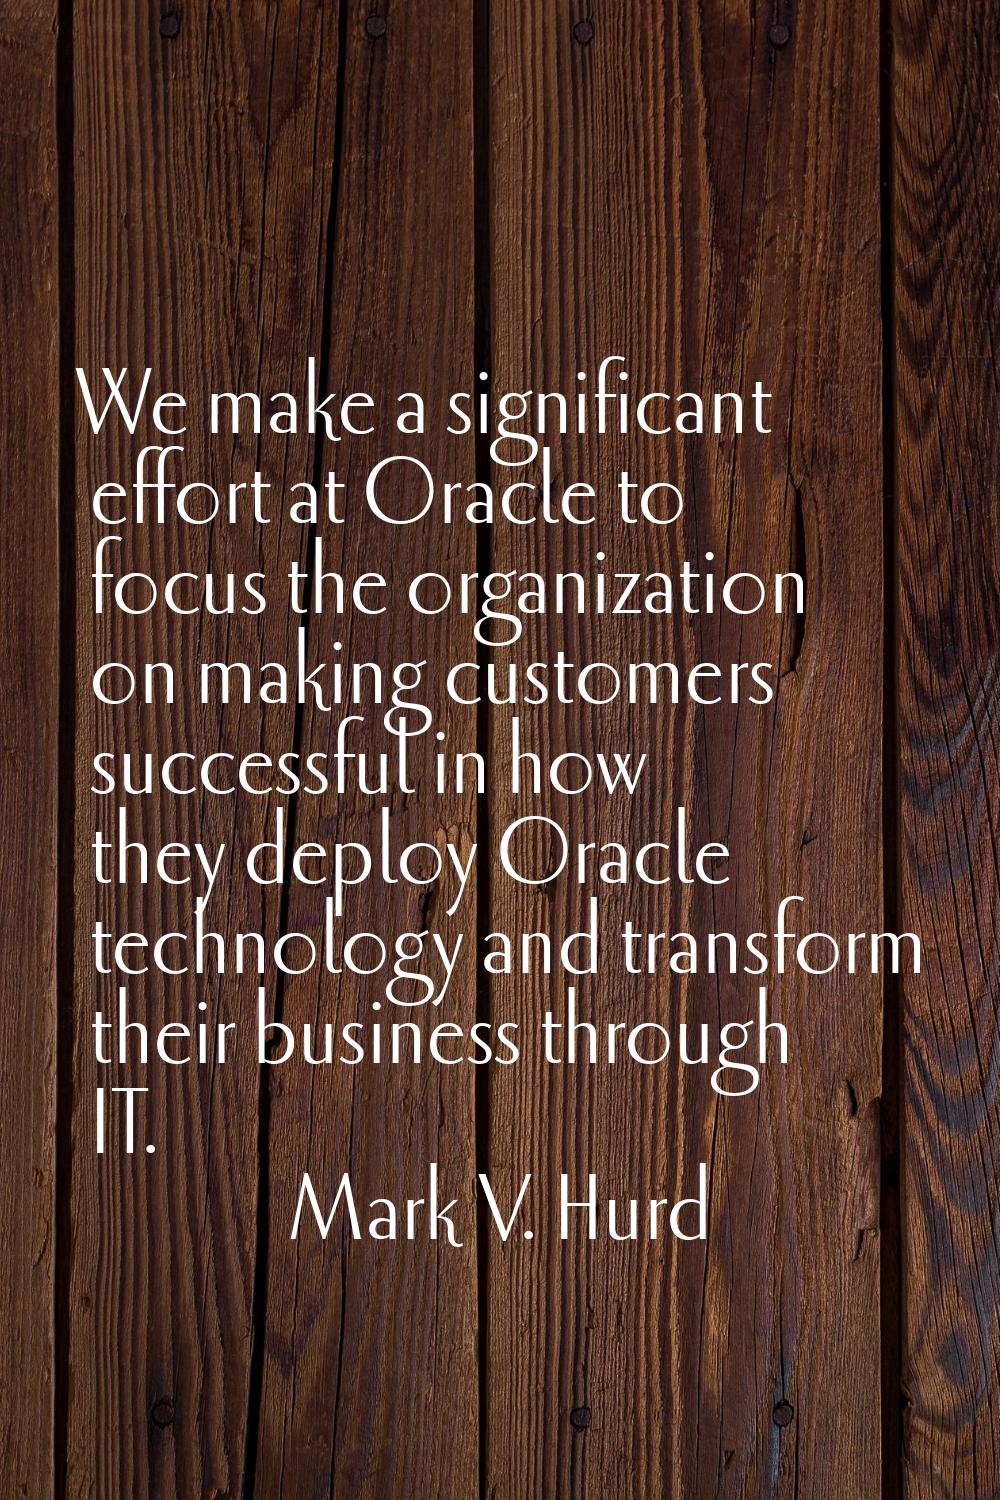 We make a significant effort at Oracle to focus the organization on making customers successful in 